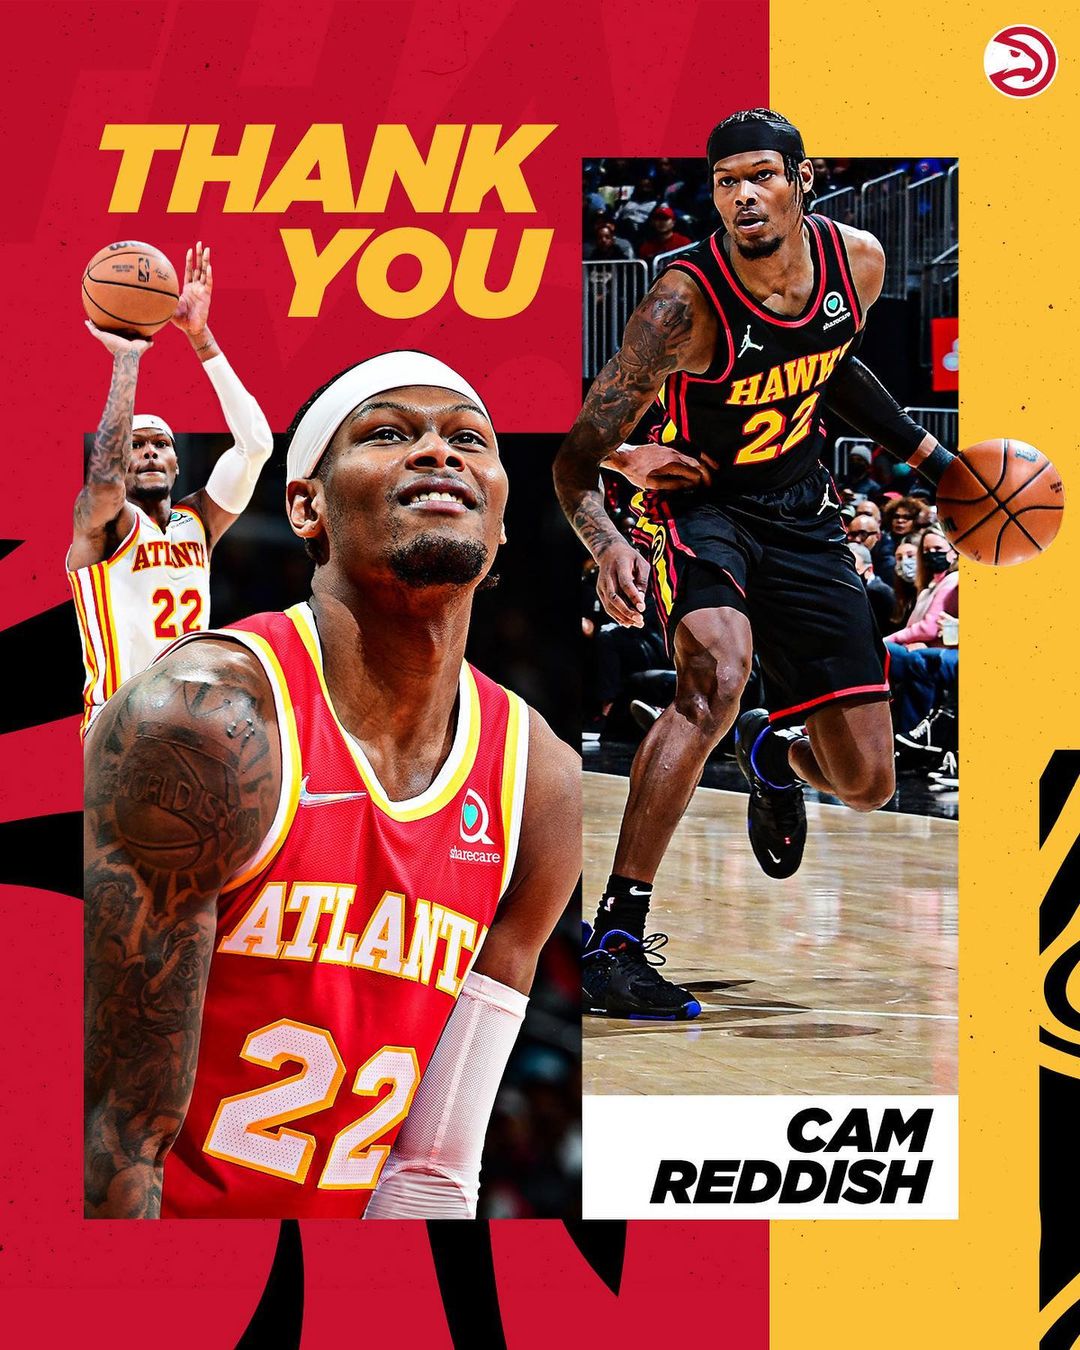 Thank you for your commitment on and off the court. Wishing you the best, Cam....